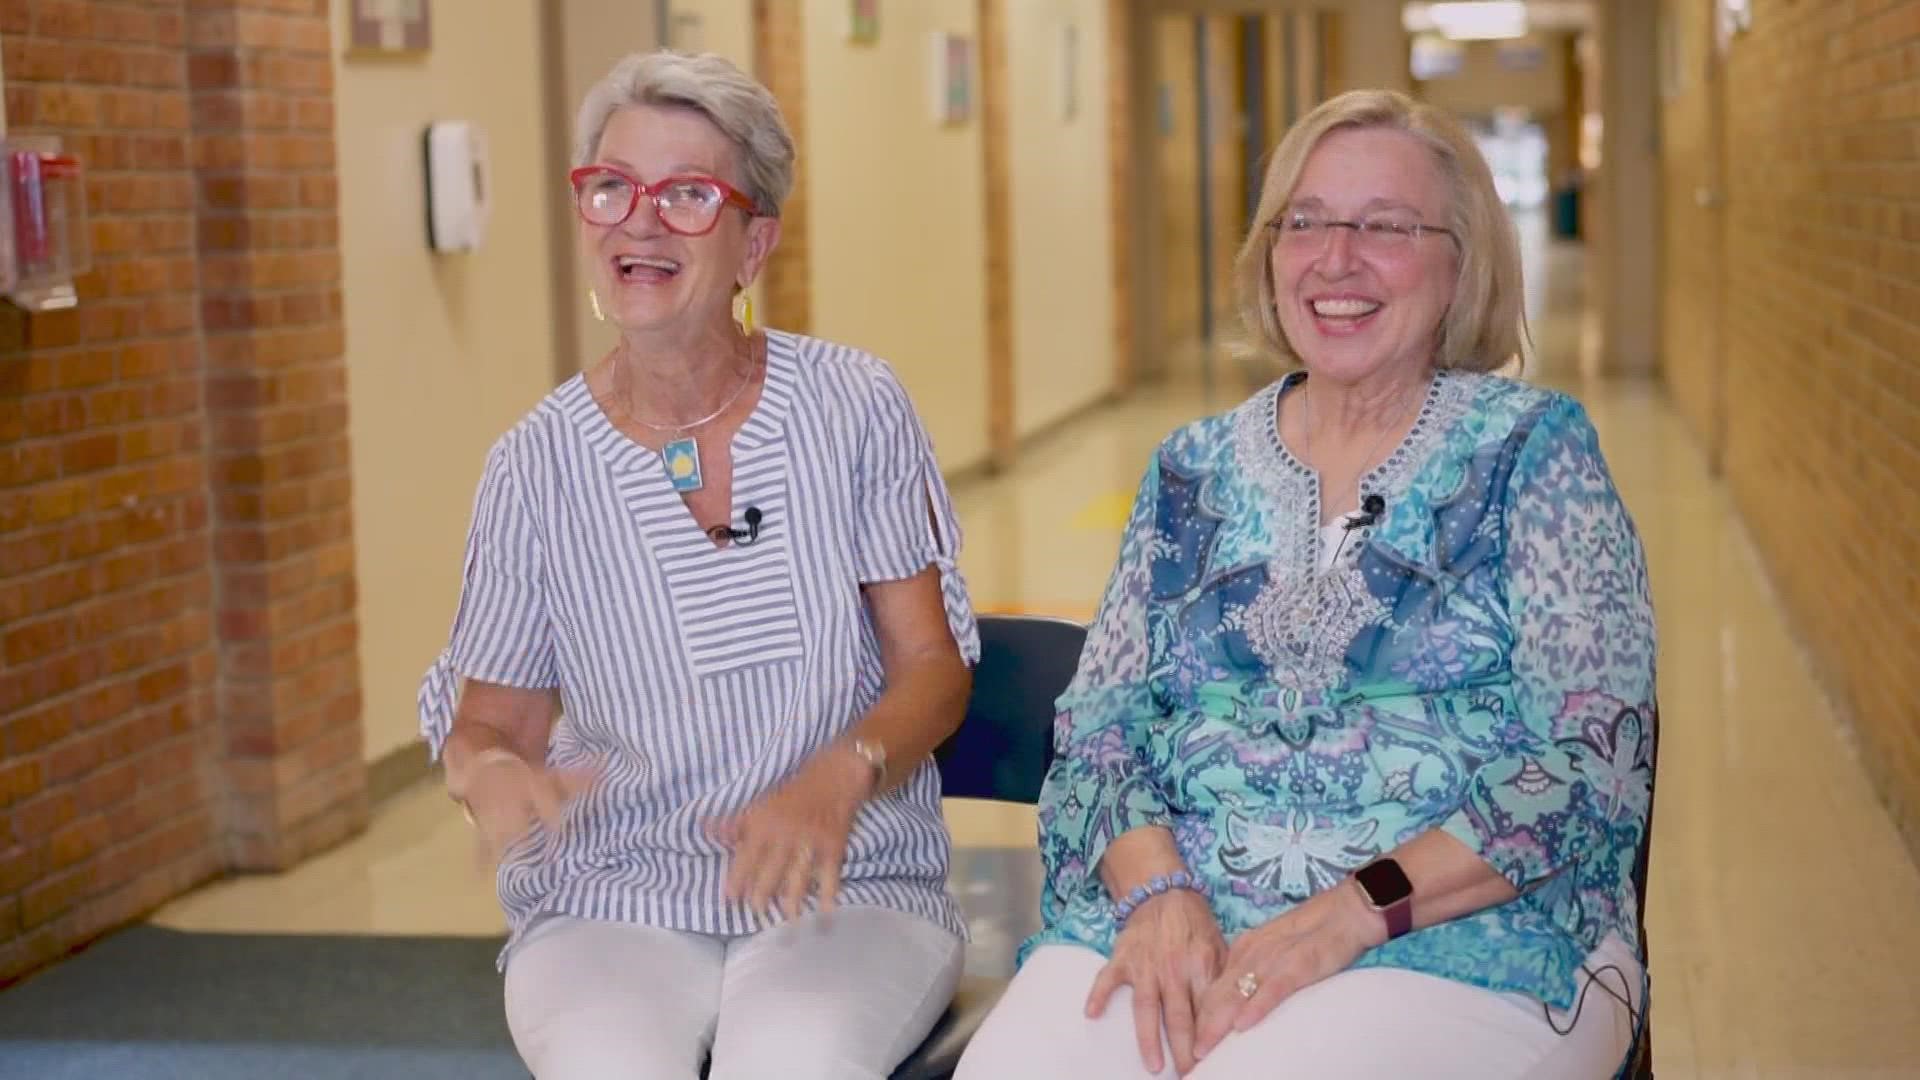 Woodridge Elementary School's Debbie Dixon and Carol Walters have embraced technology and adapted through the years.